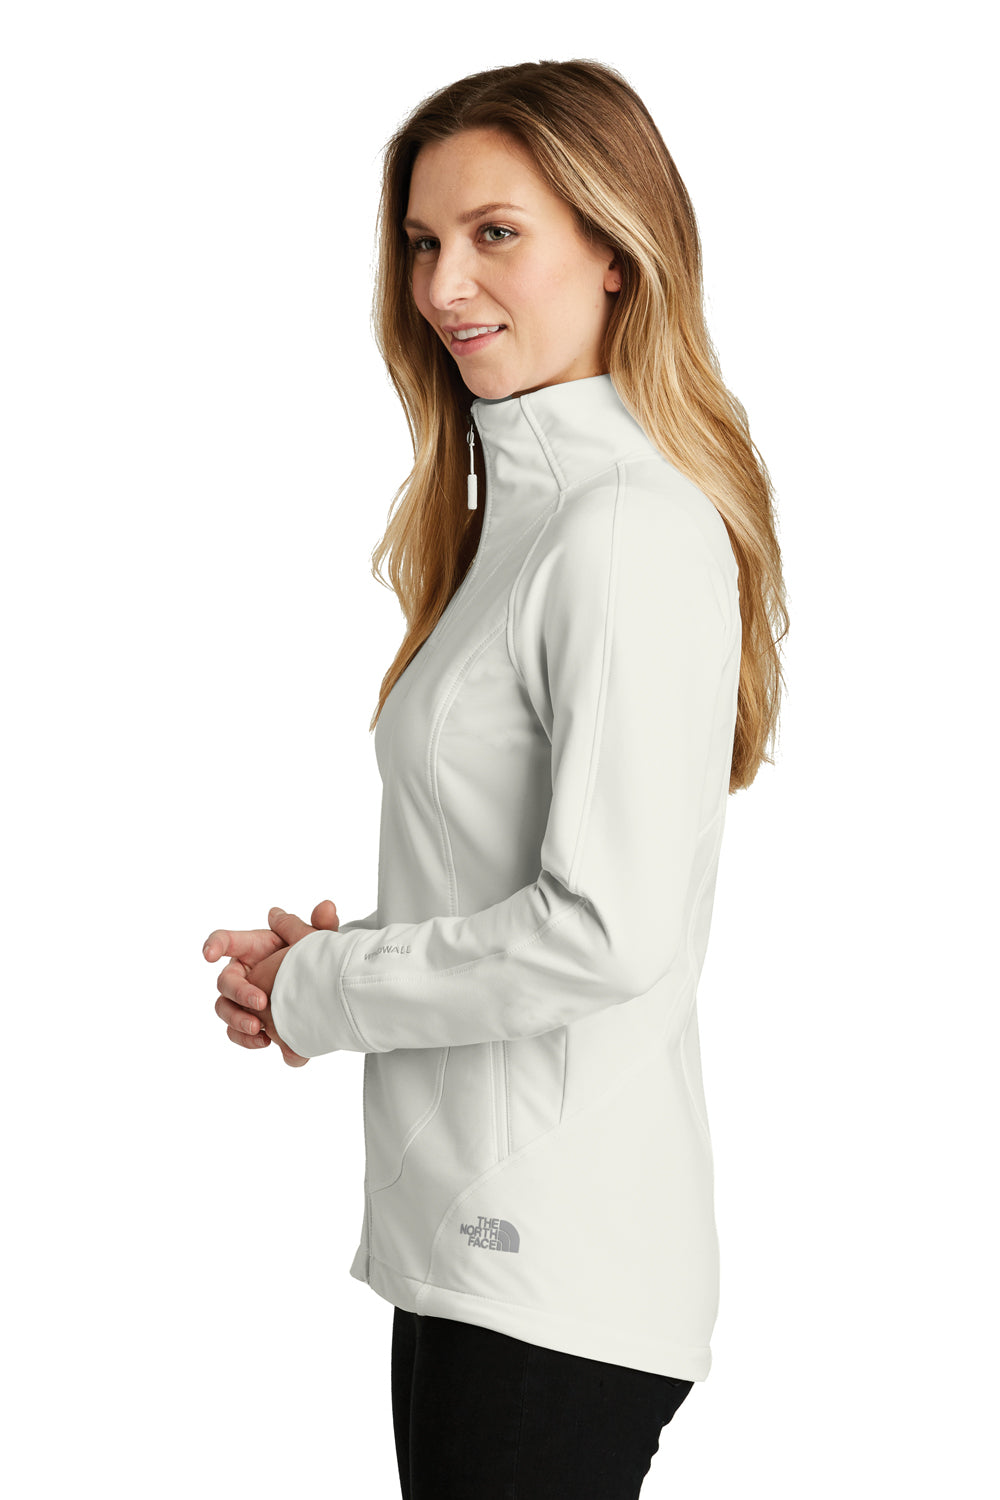 The North Face NF0A3LGW Womens Tech Wind & Water Resistant Full Zip Jacket White Side